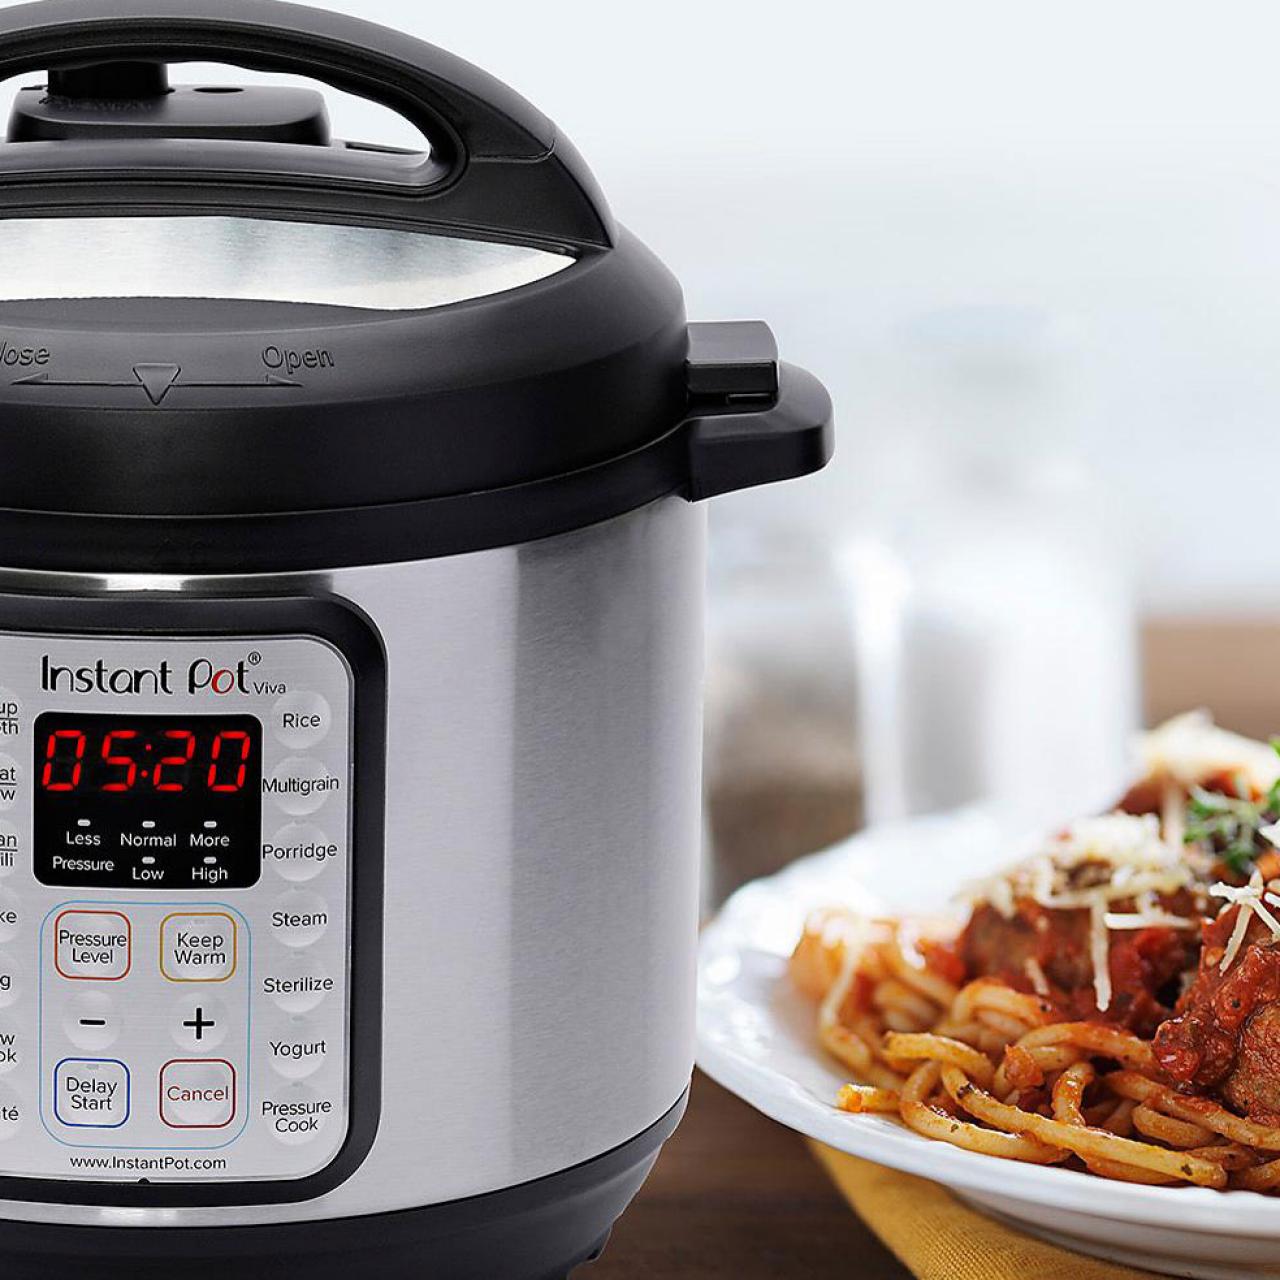 https://food.fnr.sndimg.com/content/dam/images/food/products/2019/11/8/rx_instant-pot-8-quart-viva-9-in-1-multi-use-programmable-pressure-cooker.jpeg.rend.hgtvcom.1280.1280.suffix/1573230464993.jpeg